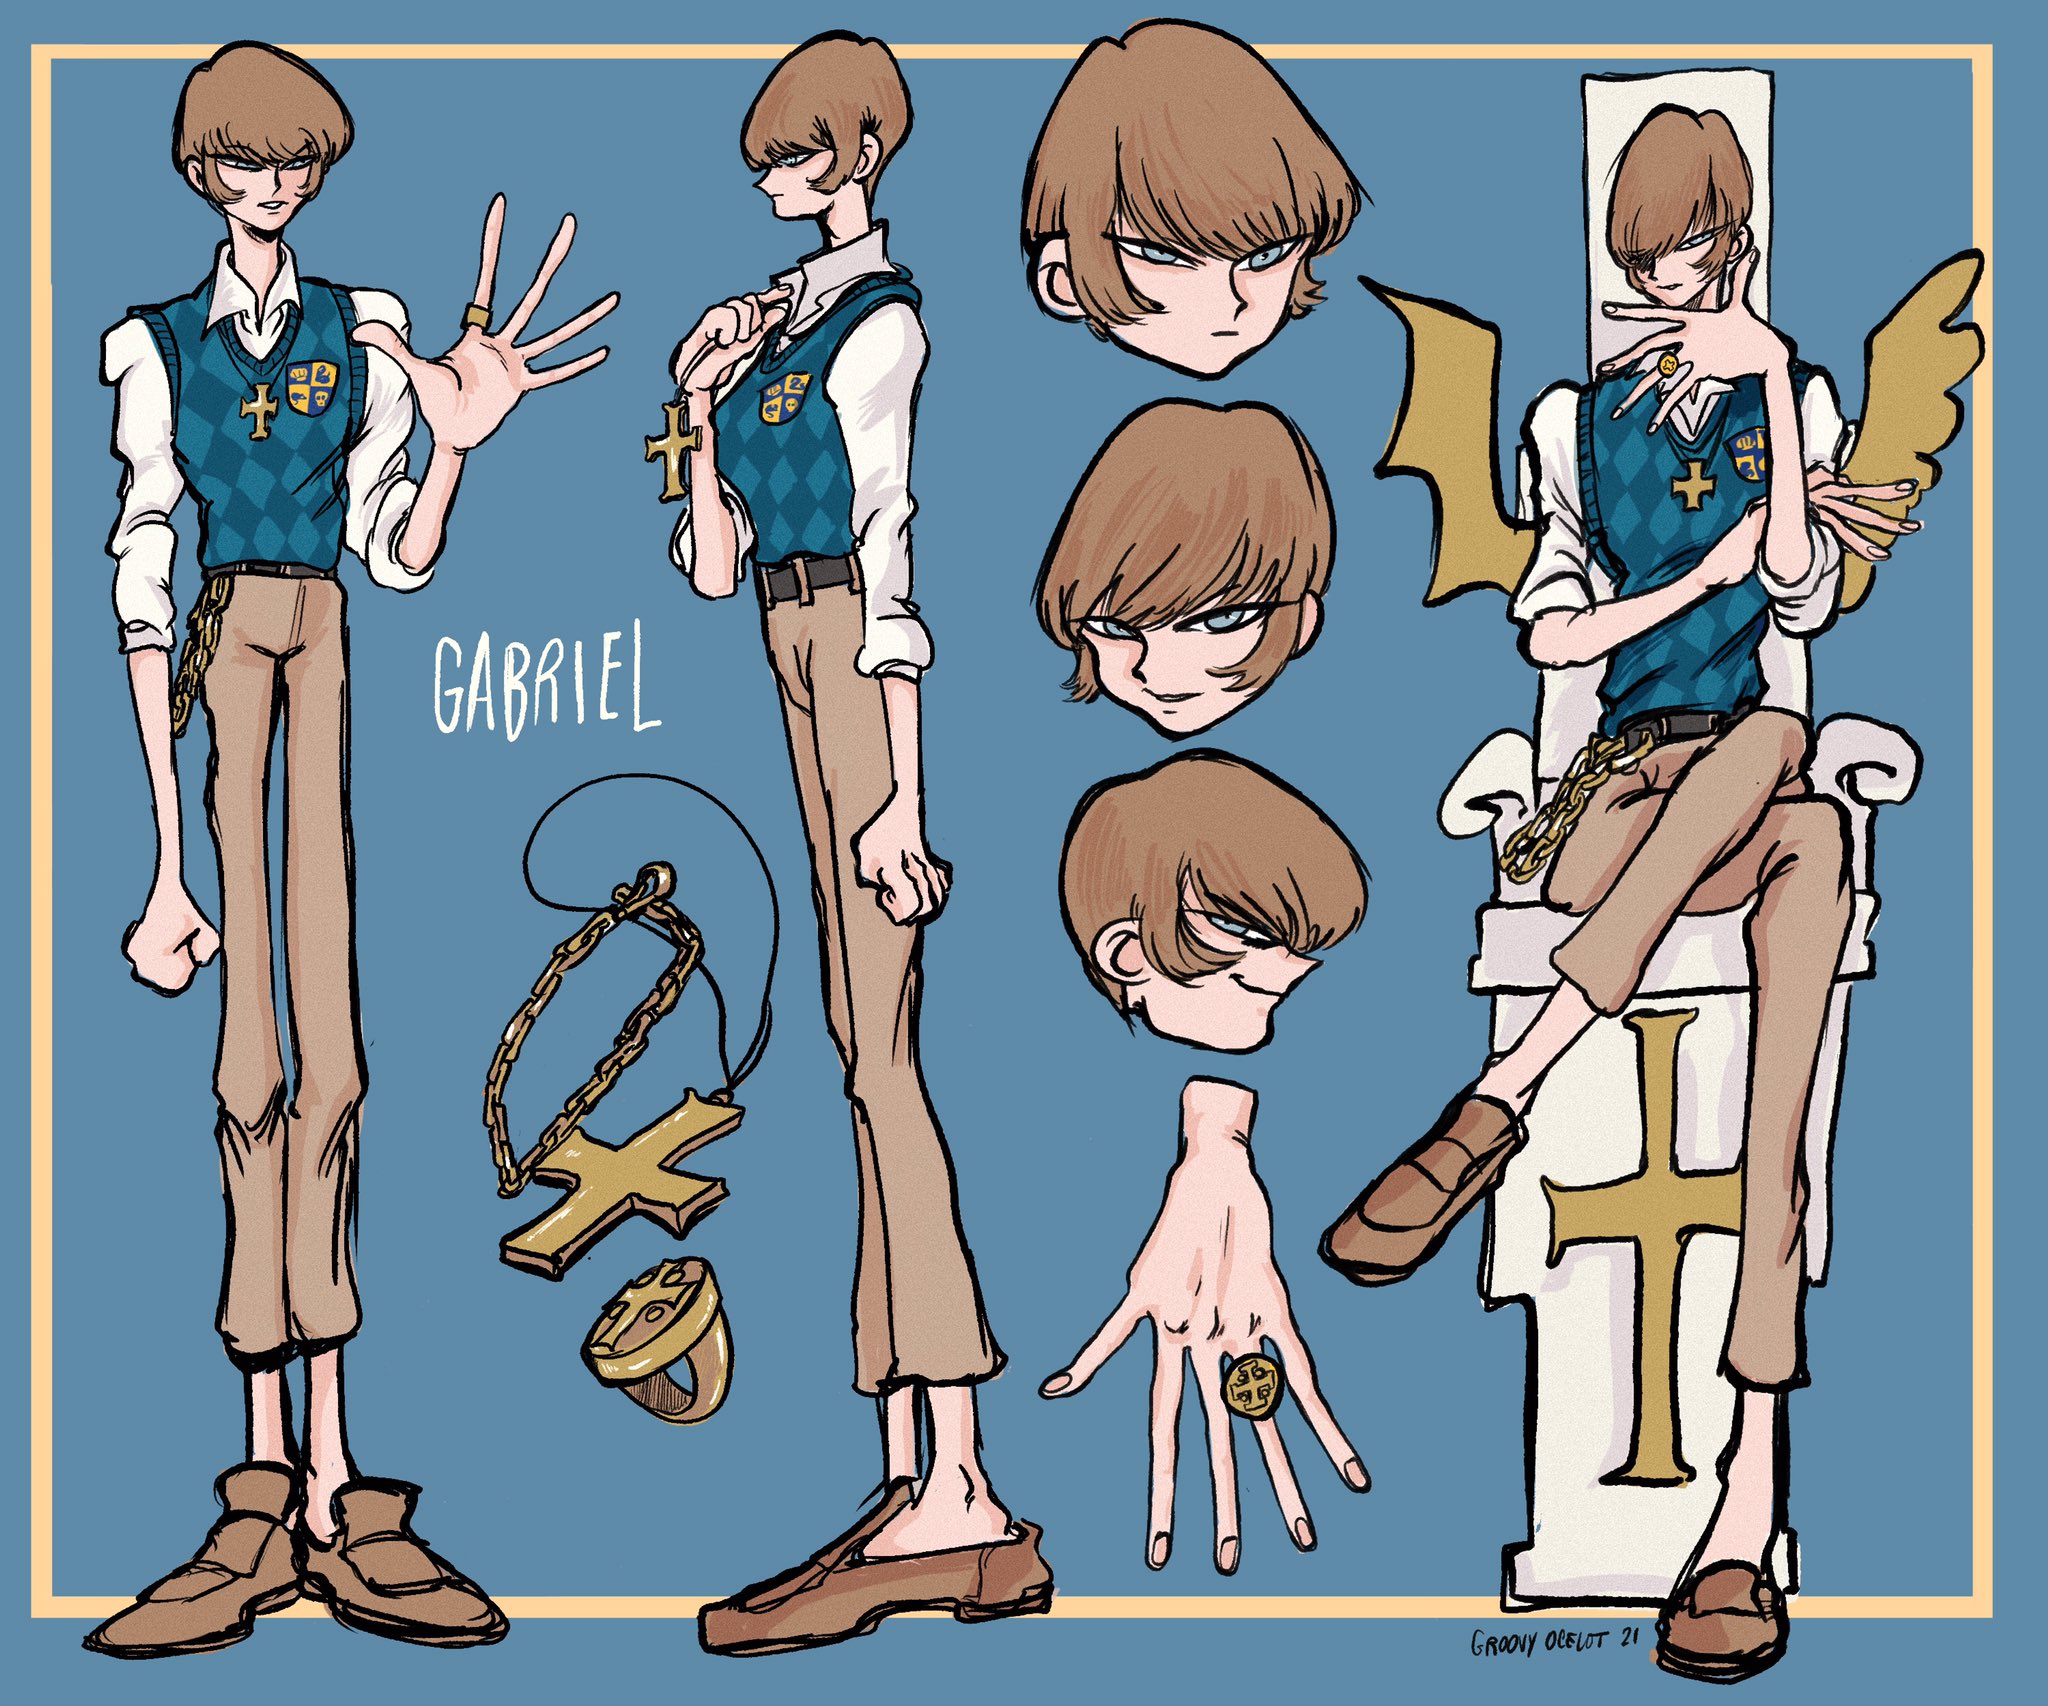 I also have worked on character design! If you are interested on a chara design, hit me up!